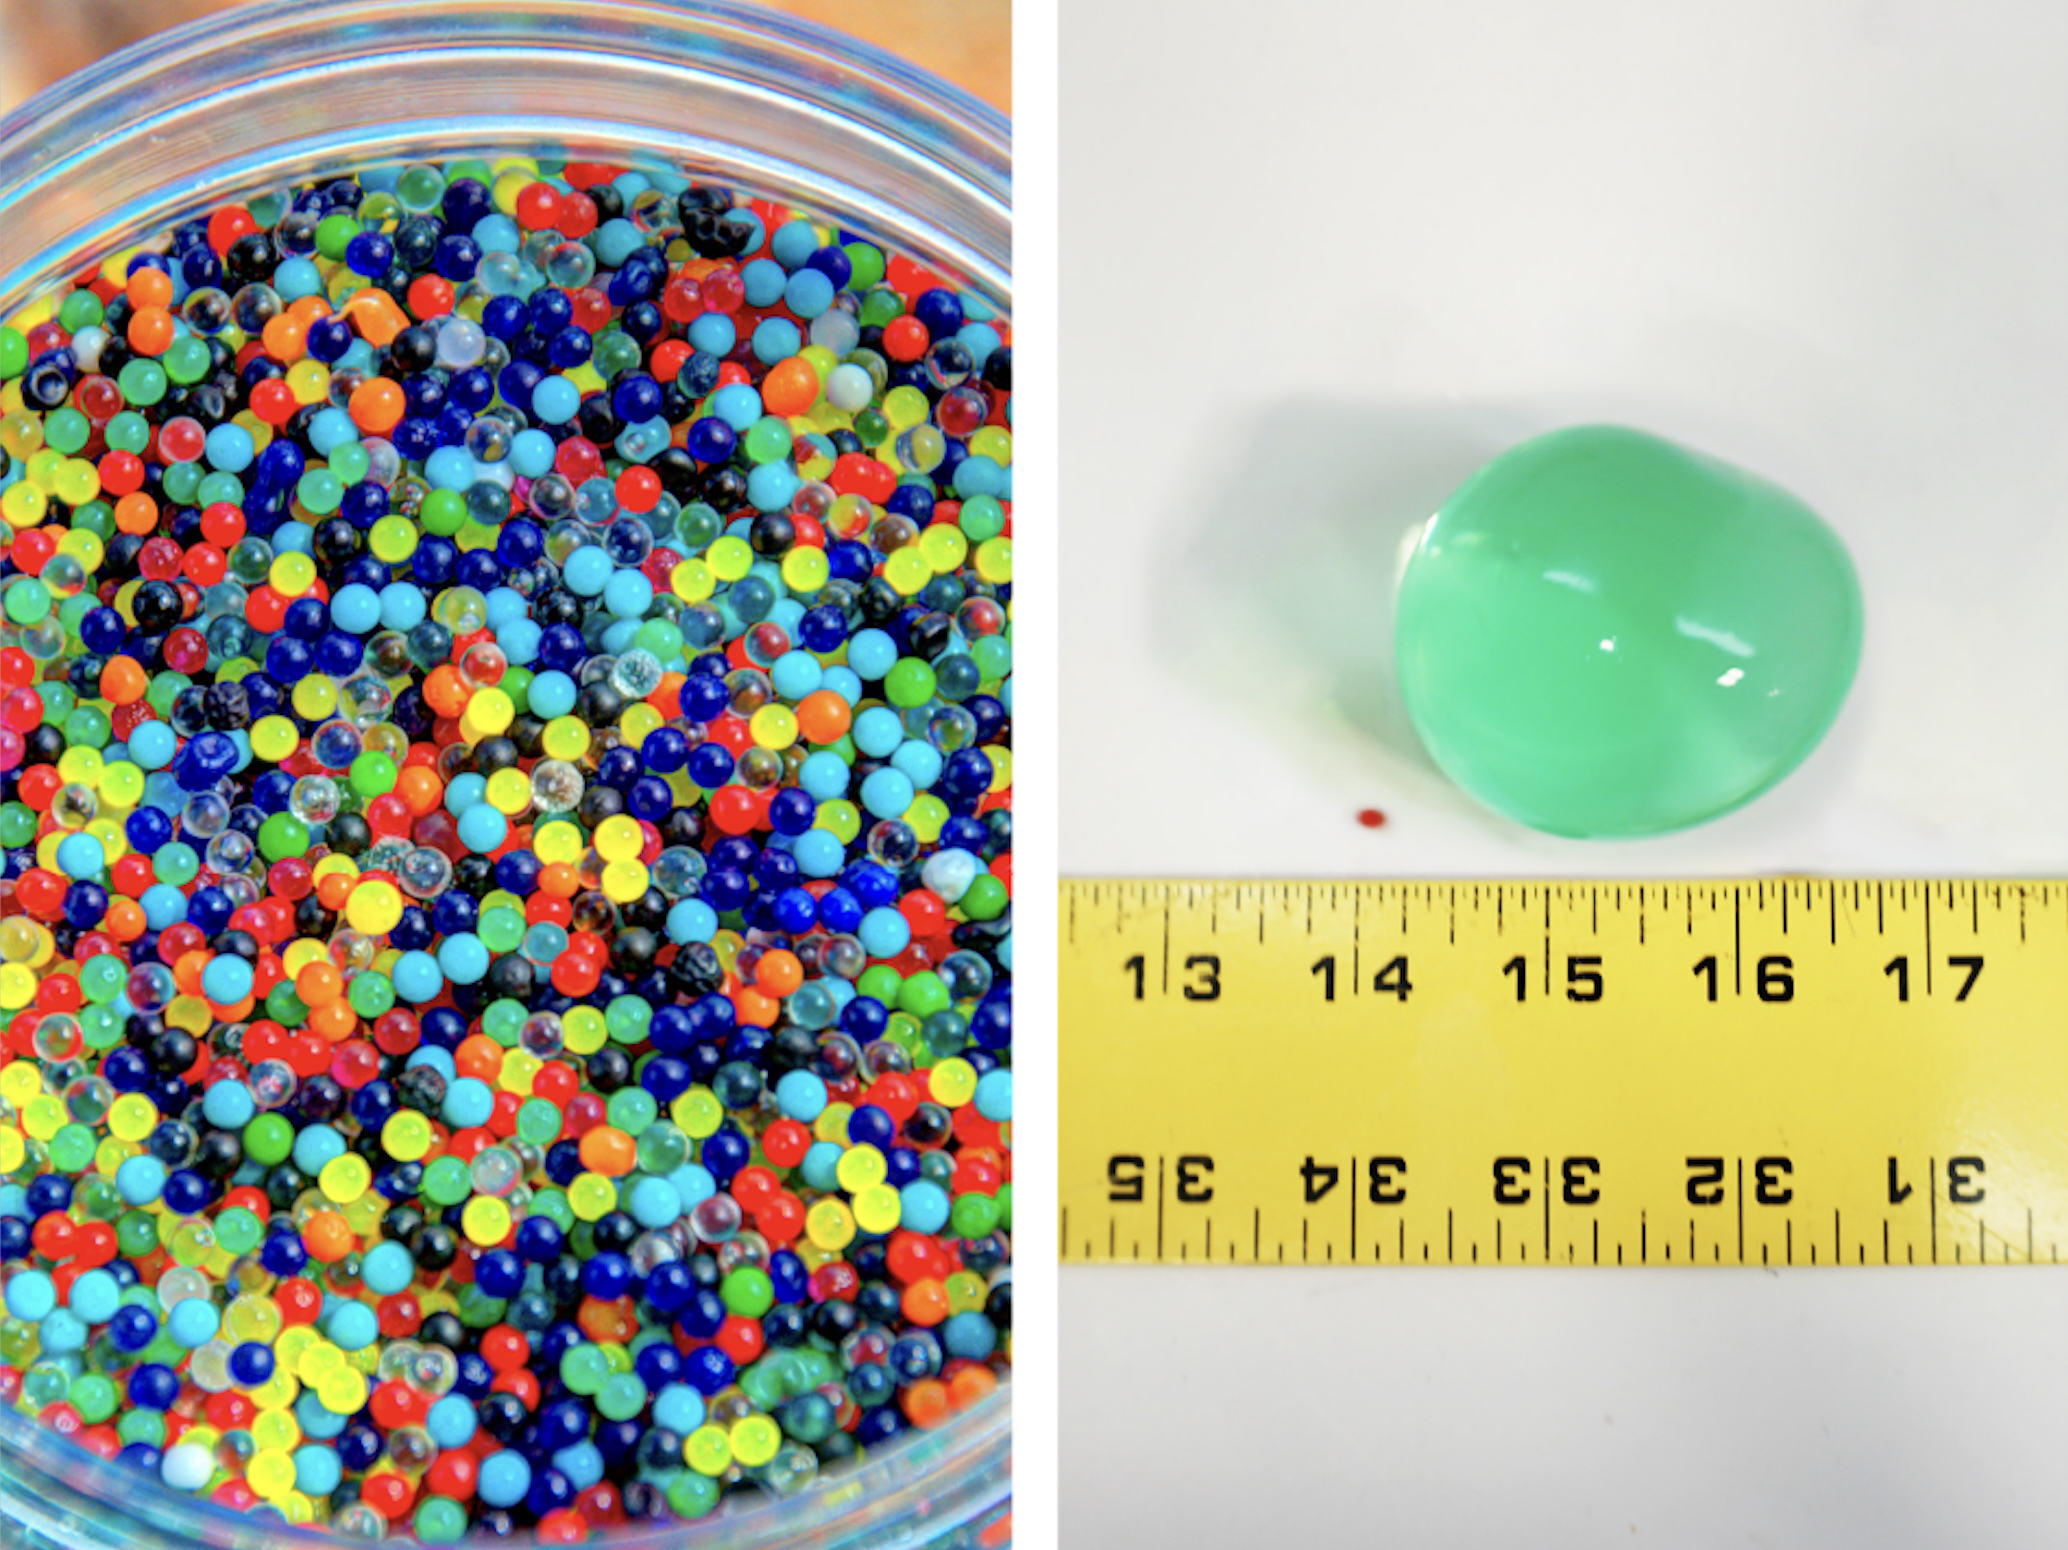  Target, Walmart to Stop Selling Water Beads Marketed to